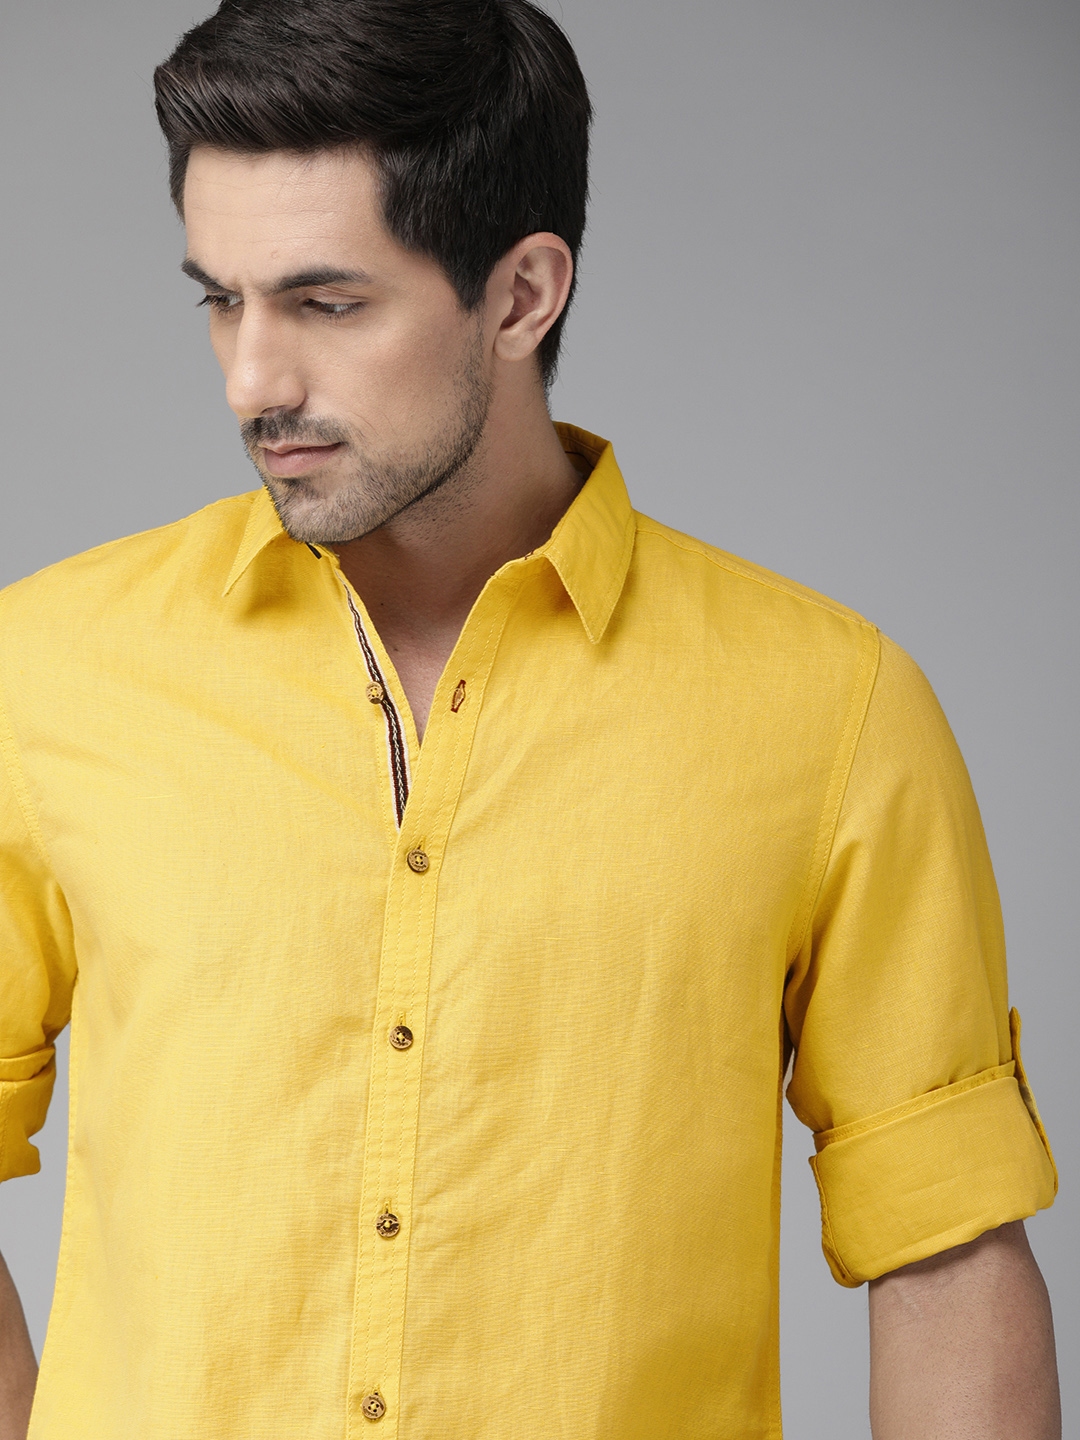 Buy The Roadster Lifestyle Co Men Mustard Yellow Regular Fit Solid ...